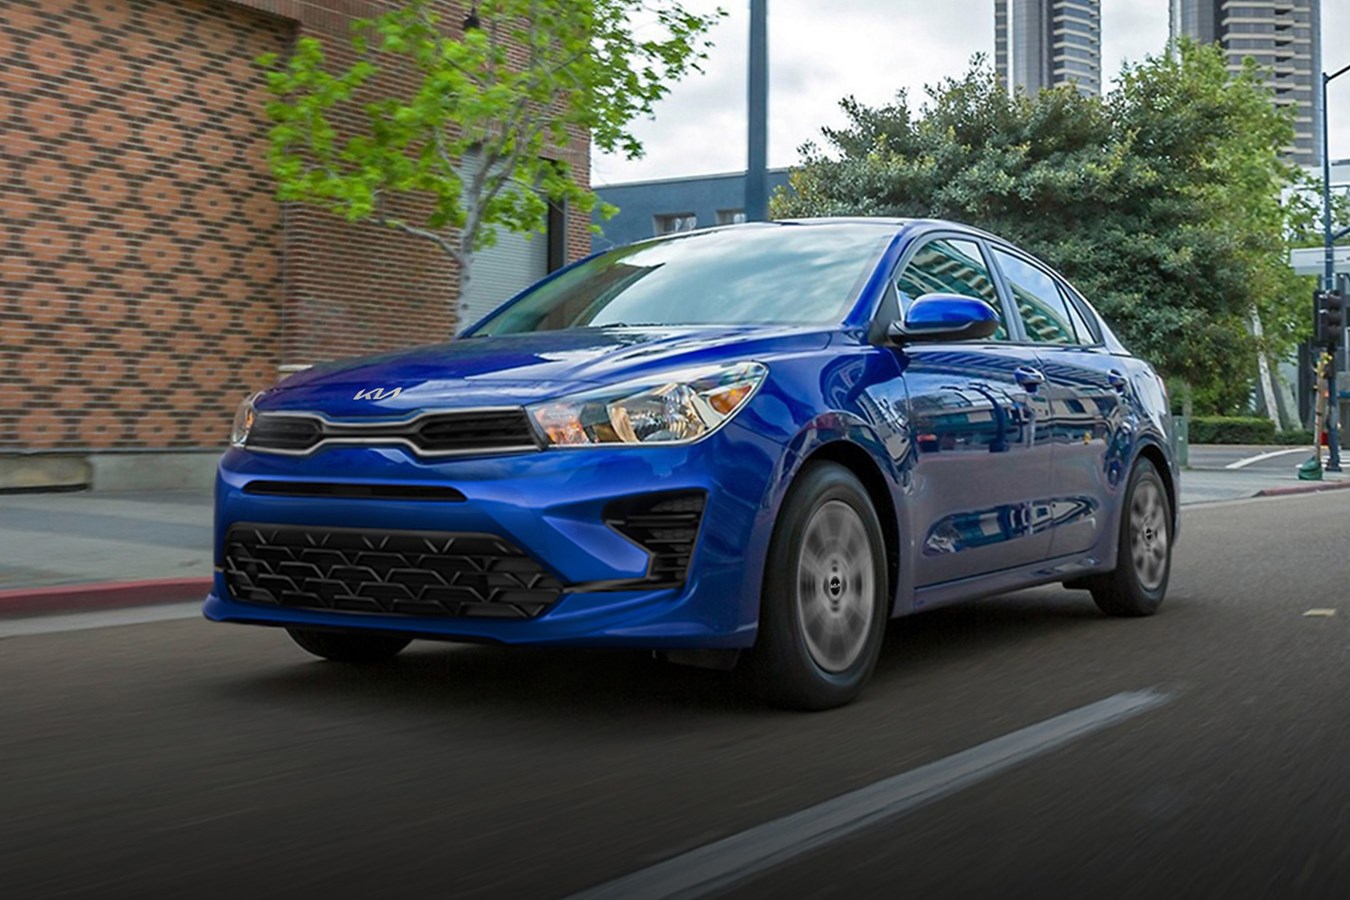 A blue 2023 Kia Rio driving on a city street. The Rio is one of two new cars under $20,000